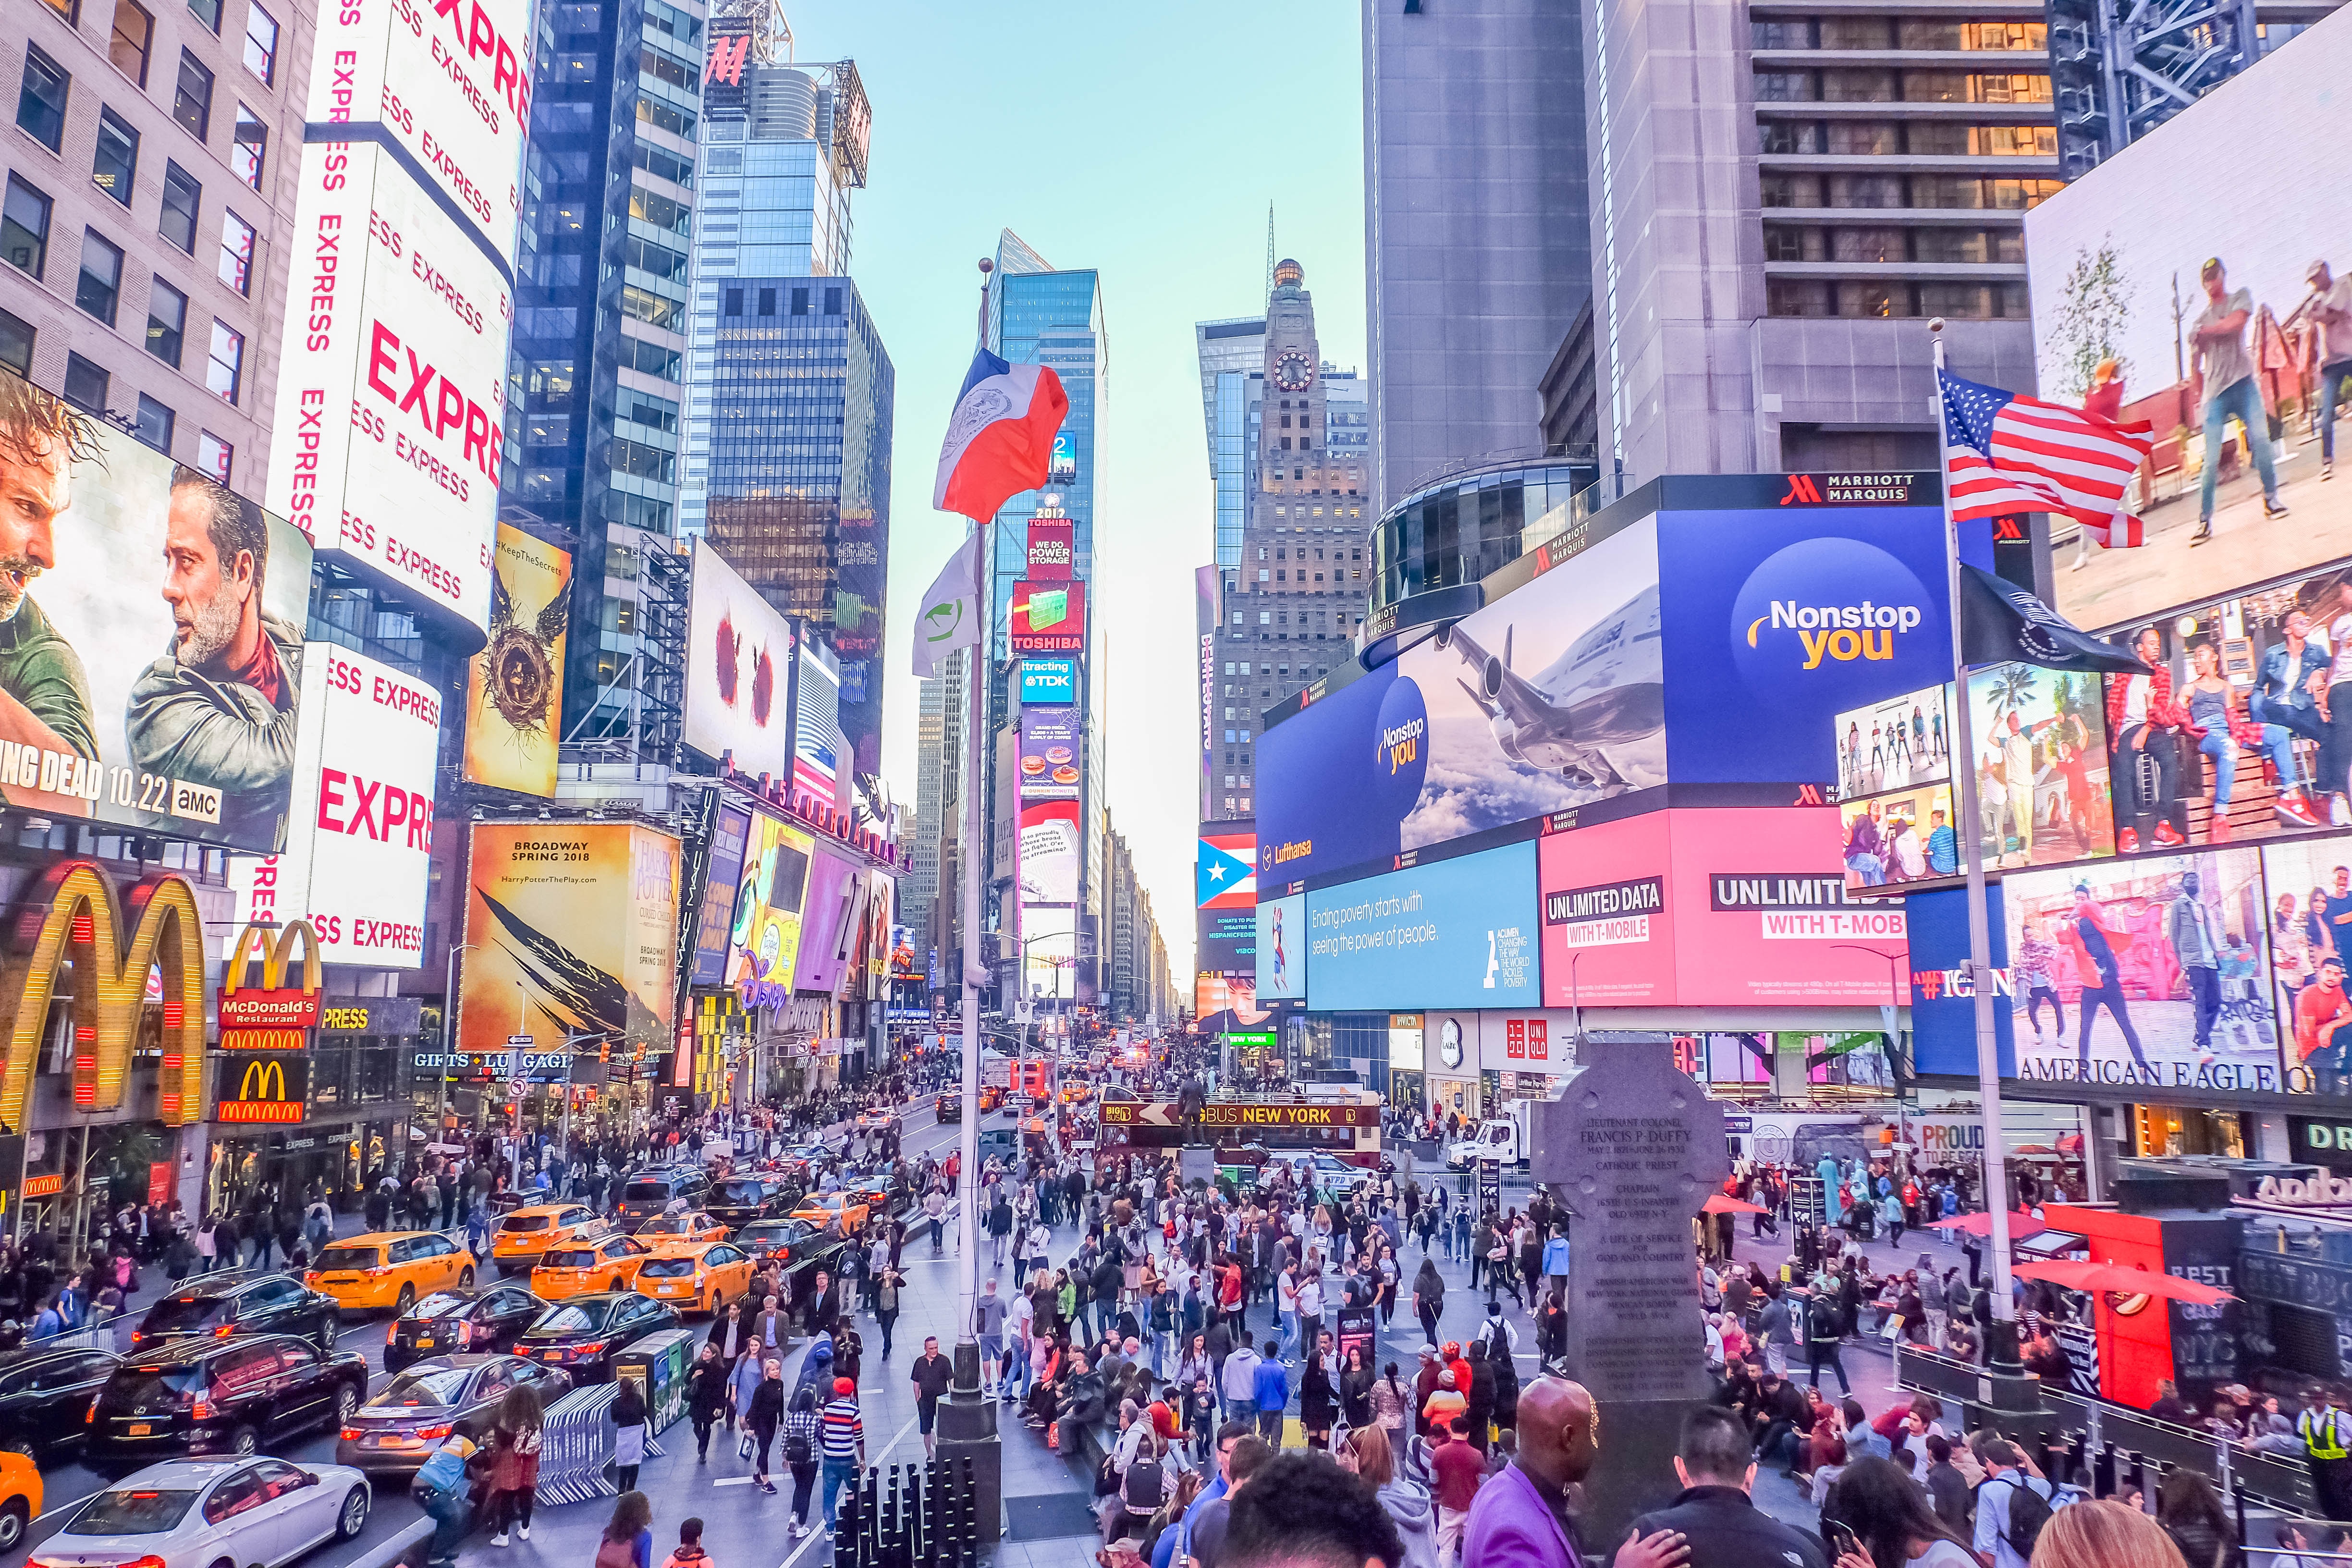 This photo shows Times Square in New York City, NY. The street is crowded with people and yellow taxis in the foreground. 